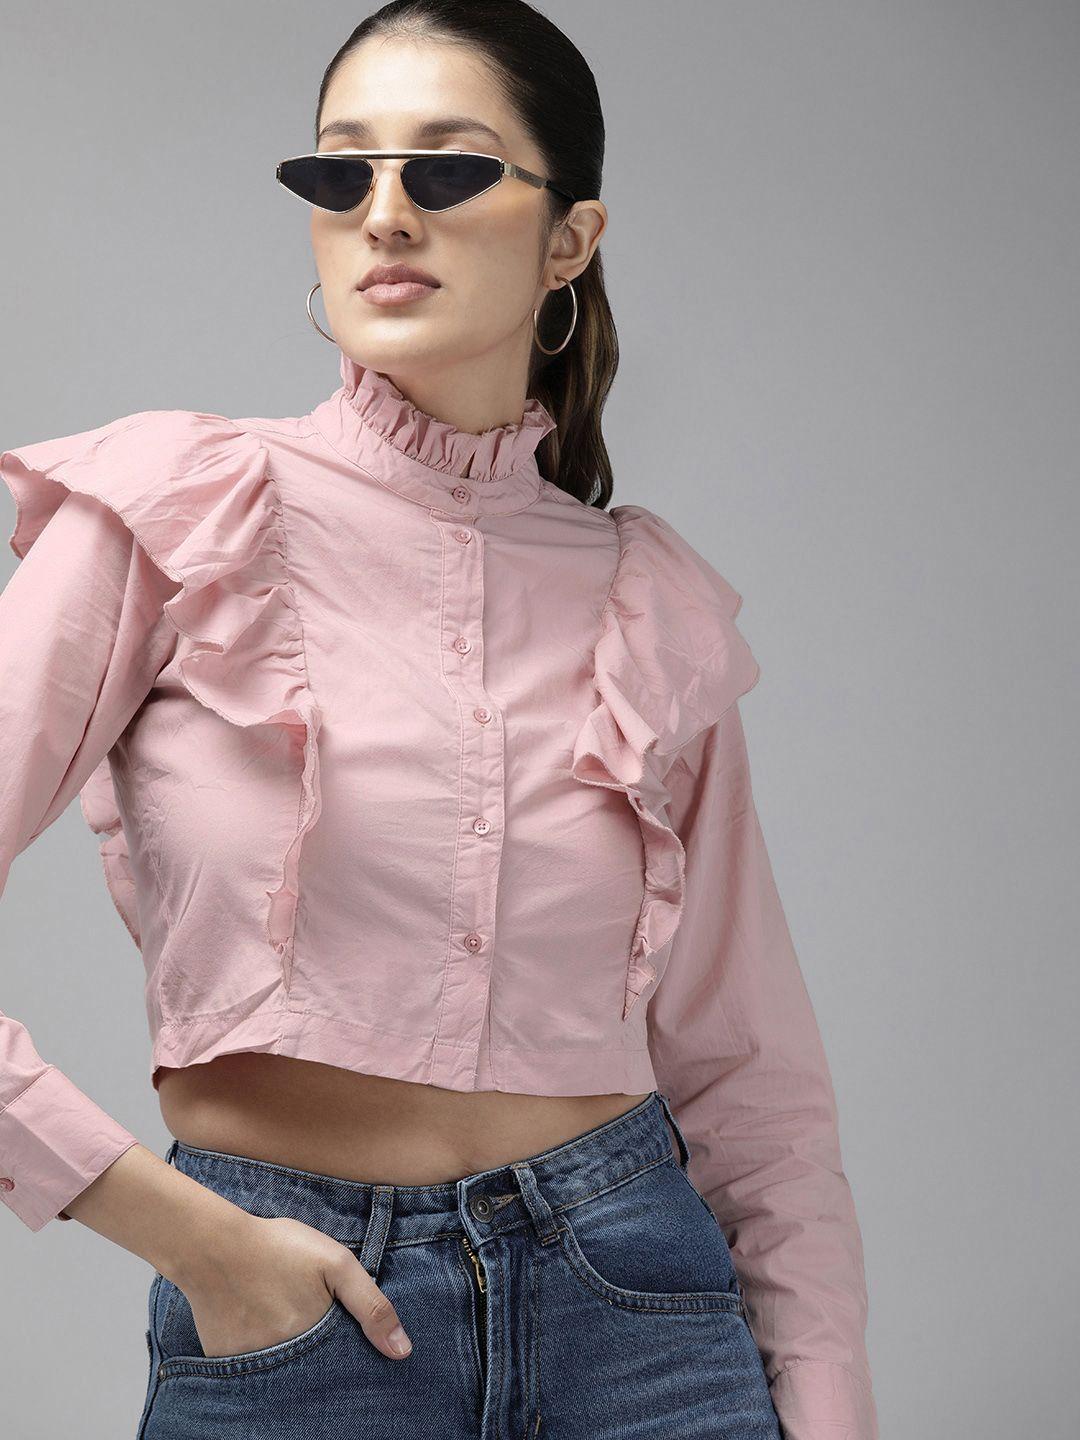 the-roadster-life-co.-slim-fit-ruffles-pure-cotton-casual-crop-shirt